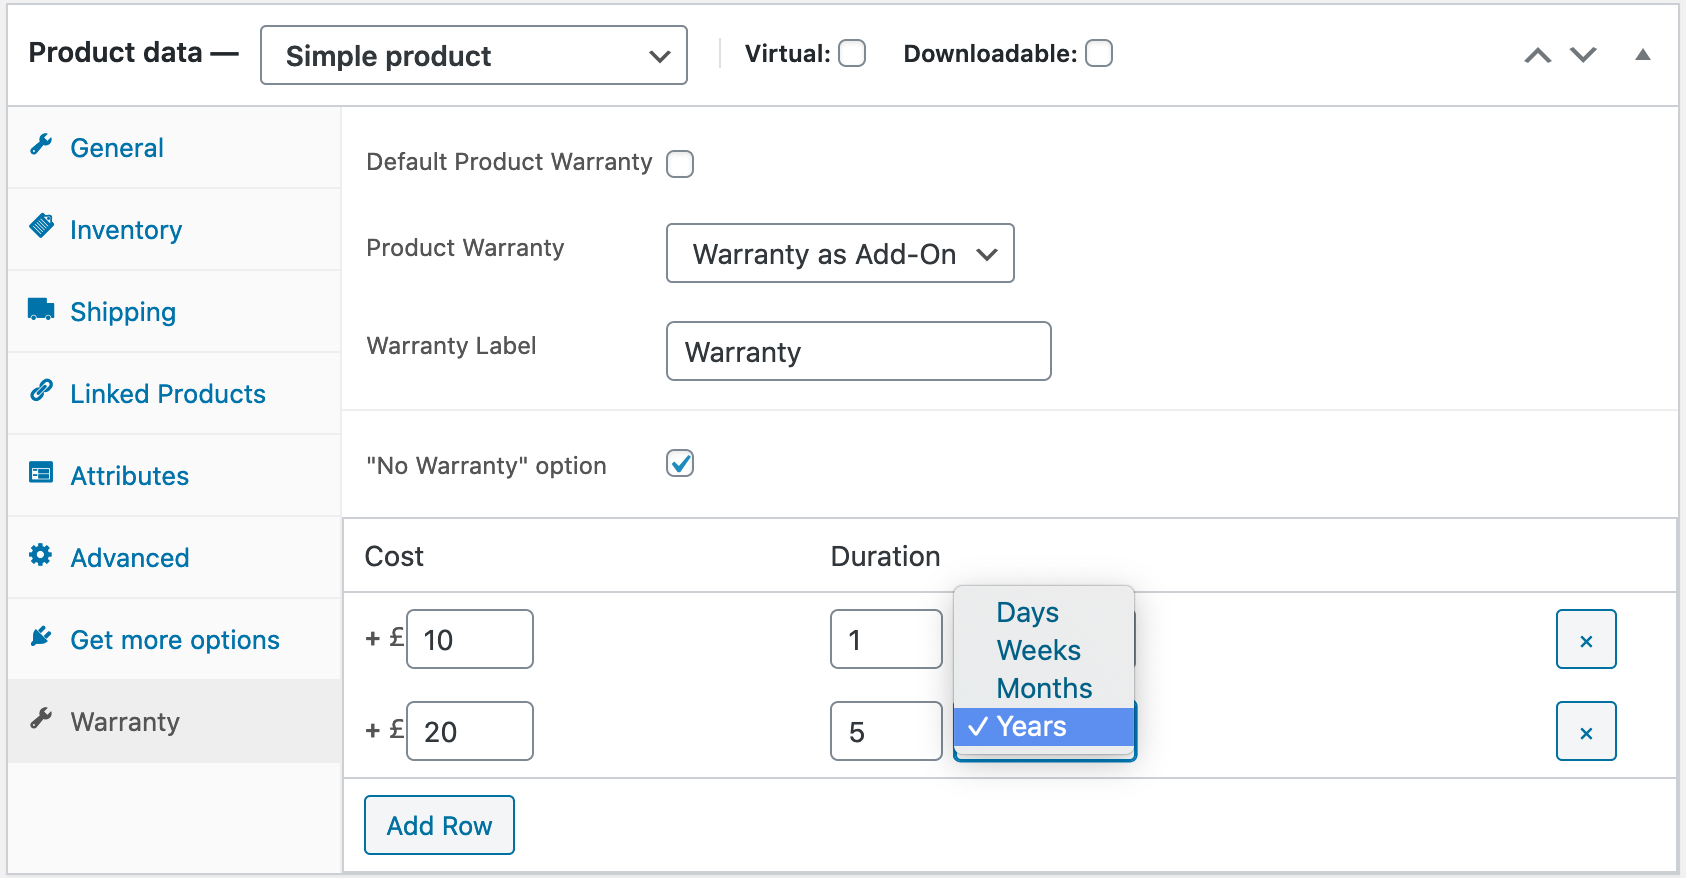 Product data settings allowing offering Warranty as an Add-On